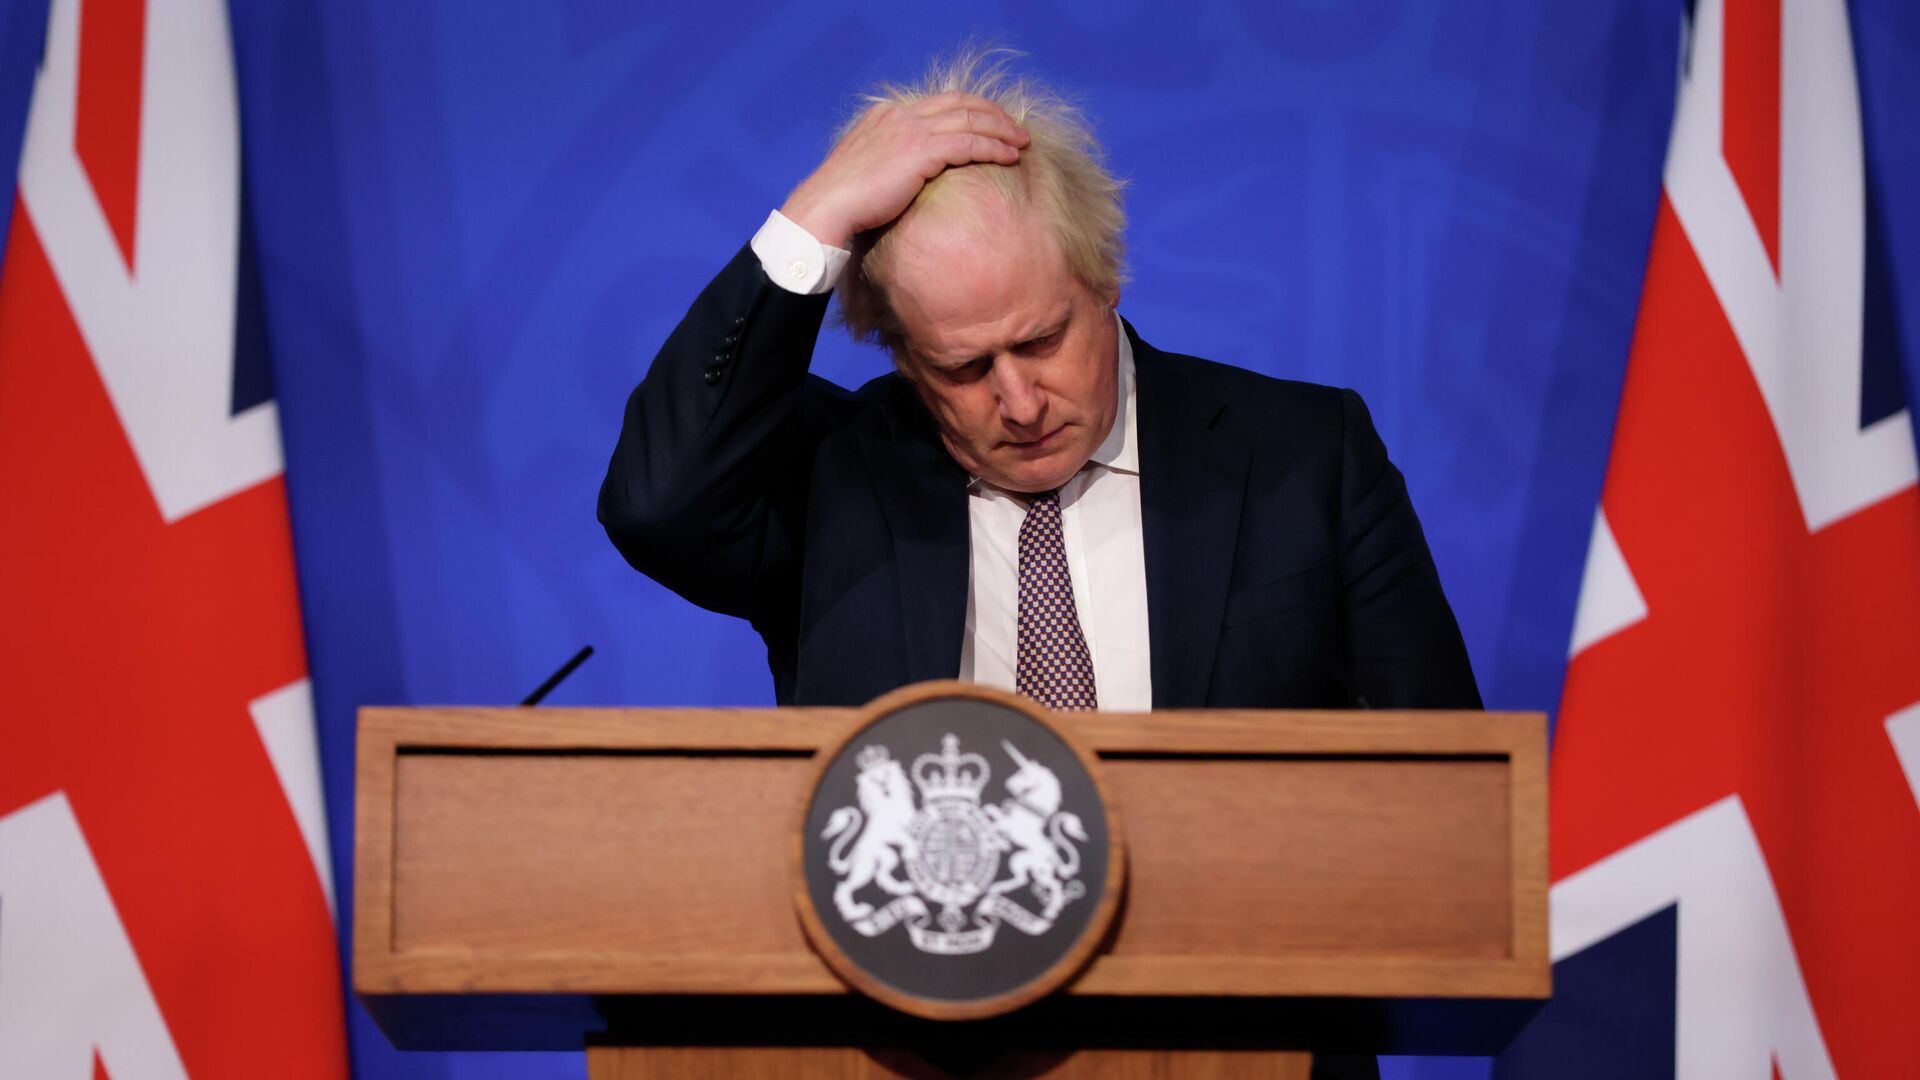 Britain's Prime Minister Boris Johnson gestures as he speaks during a press conference in London, Saturday Nov. 27, 2021, after cases of the new COVID-19 variant were confirmed in the UK - Sputnik International, 1920, 12.12.2021